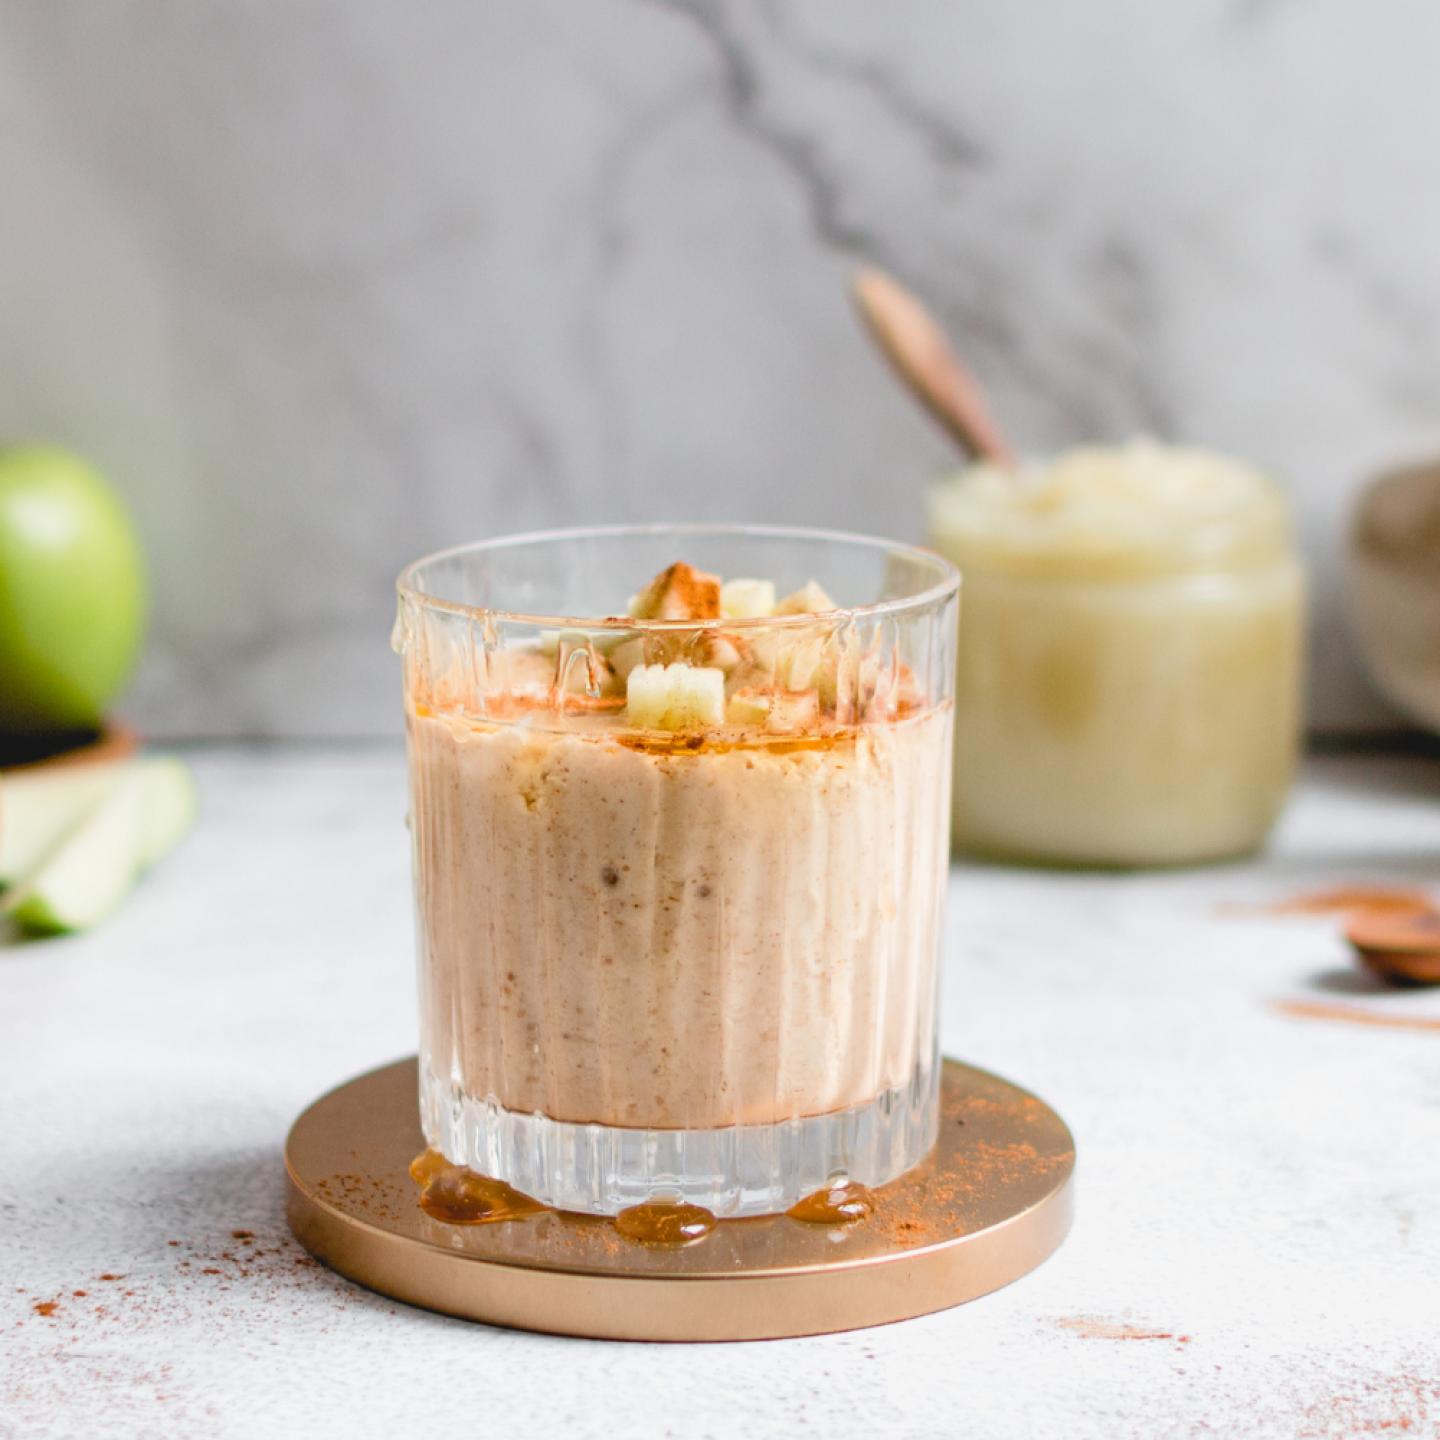 Apple banana smoothie with cinnamon, apples, bananas, and oats in a glass with apples on the side.